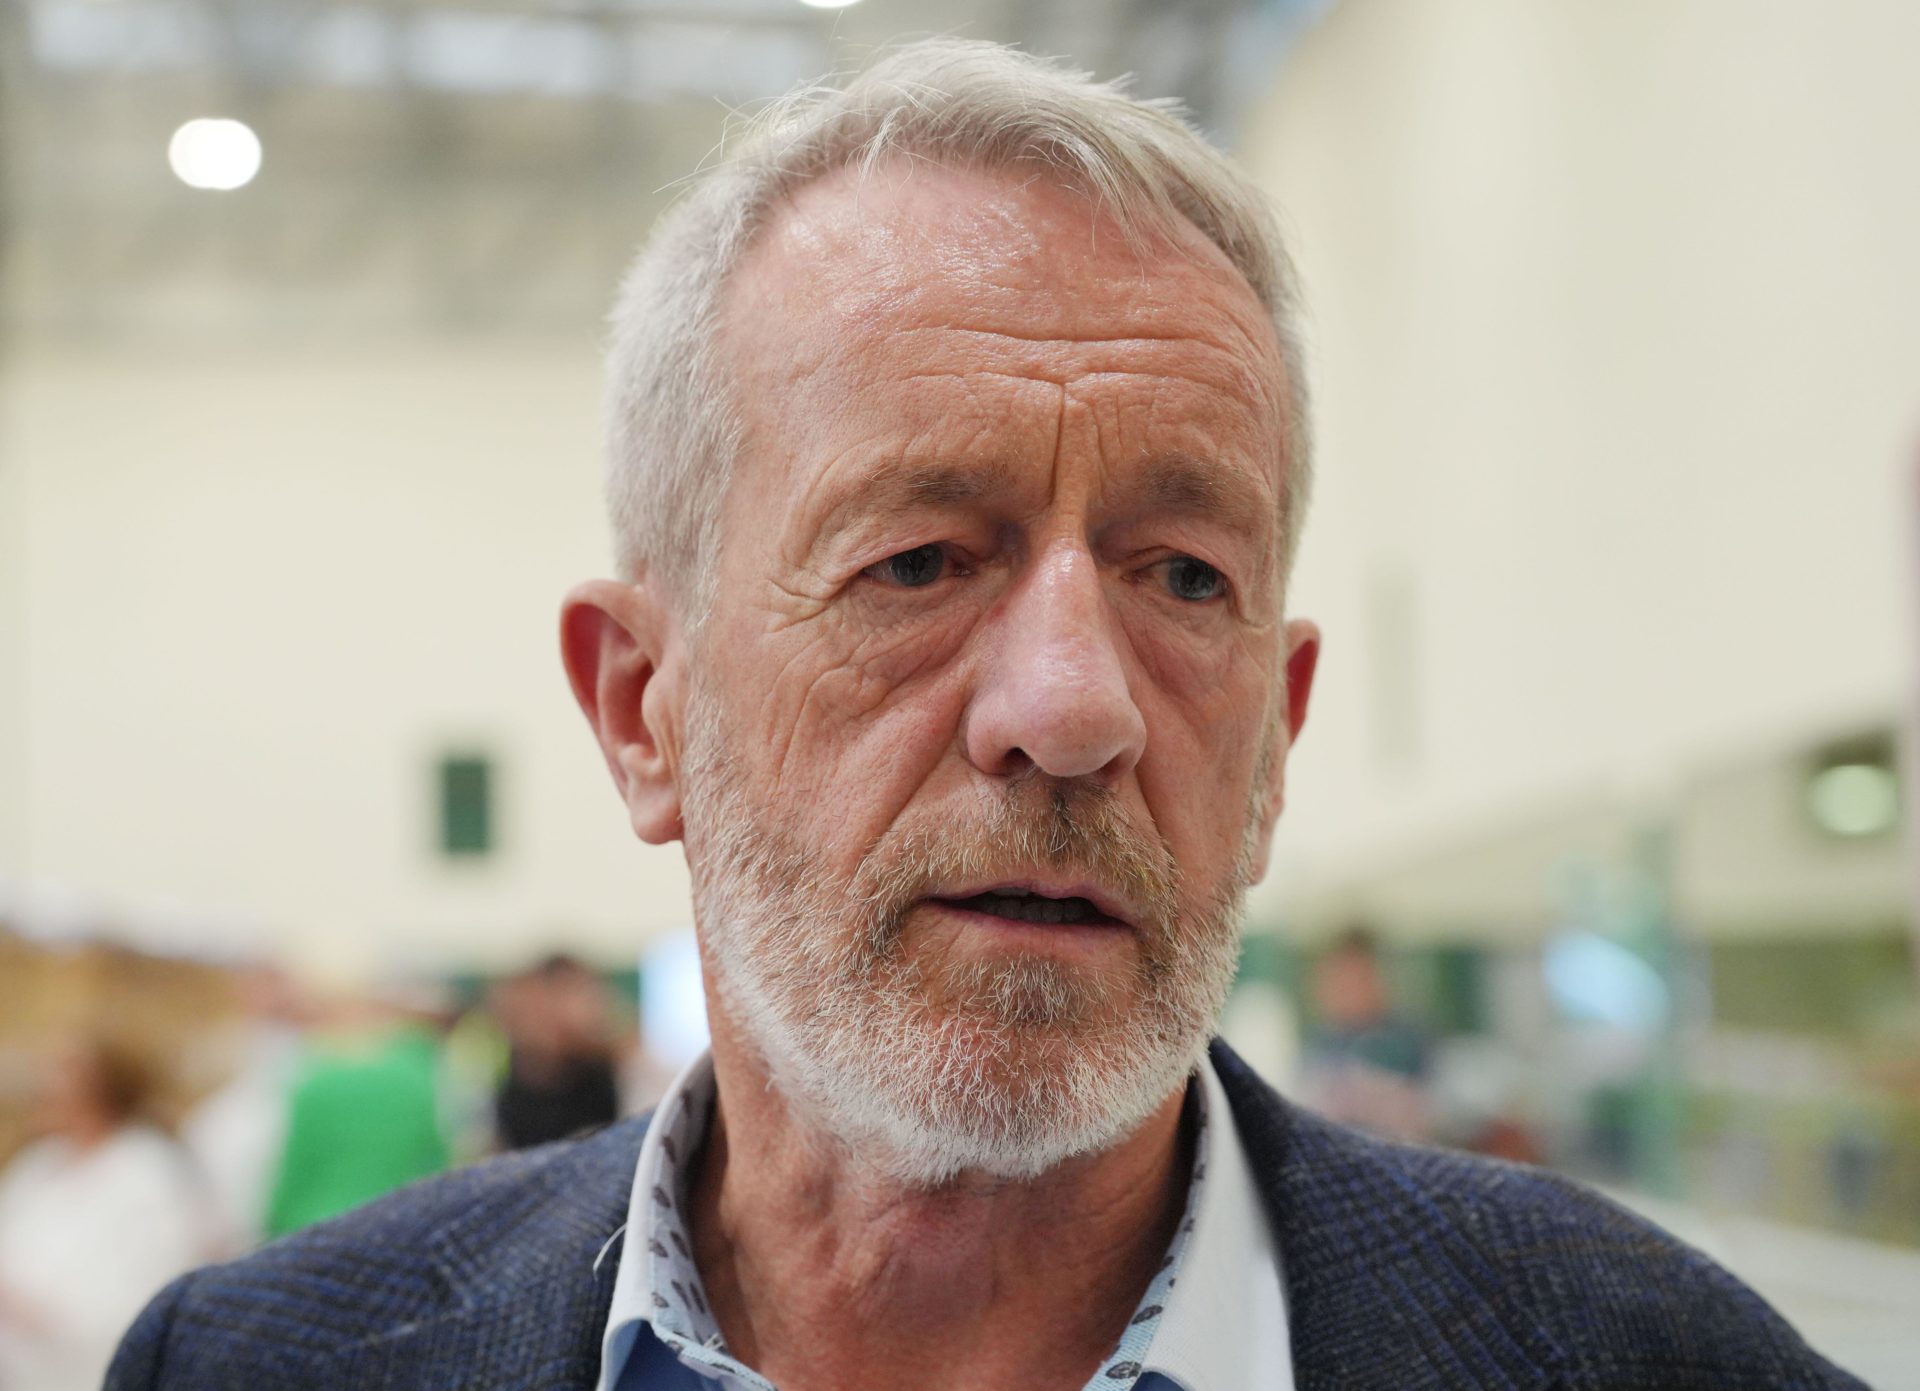 Sean Kelly ‘not worried’ about far-right after holding Ireland South seat